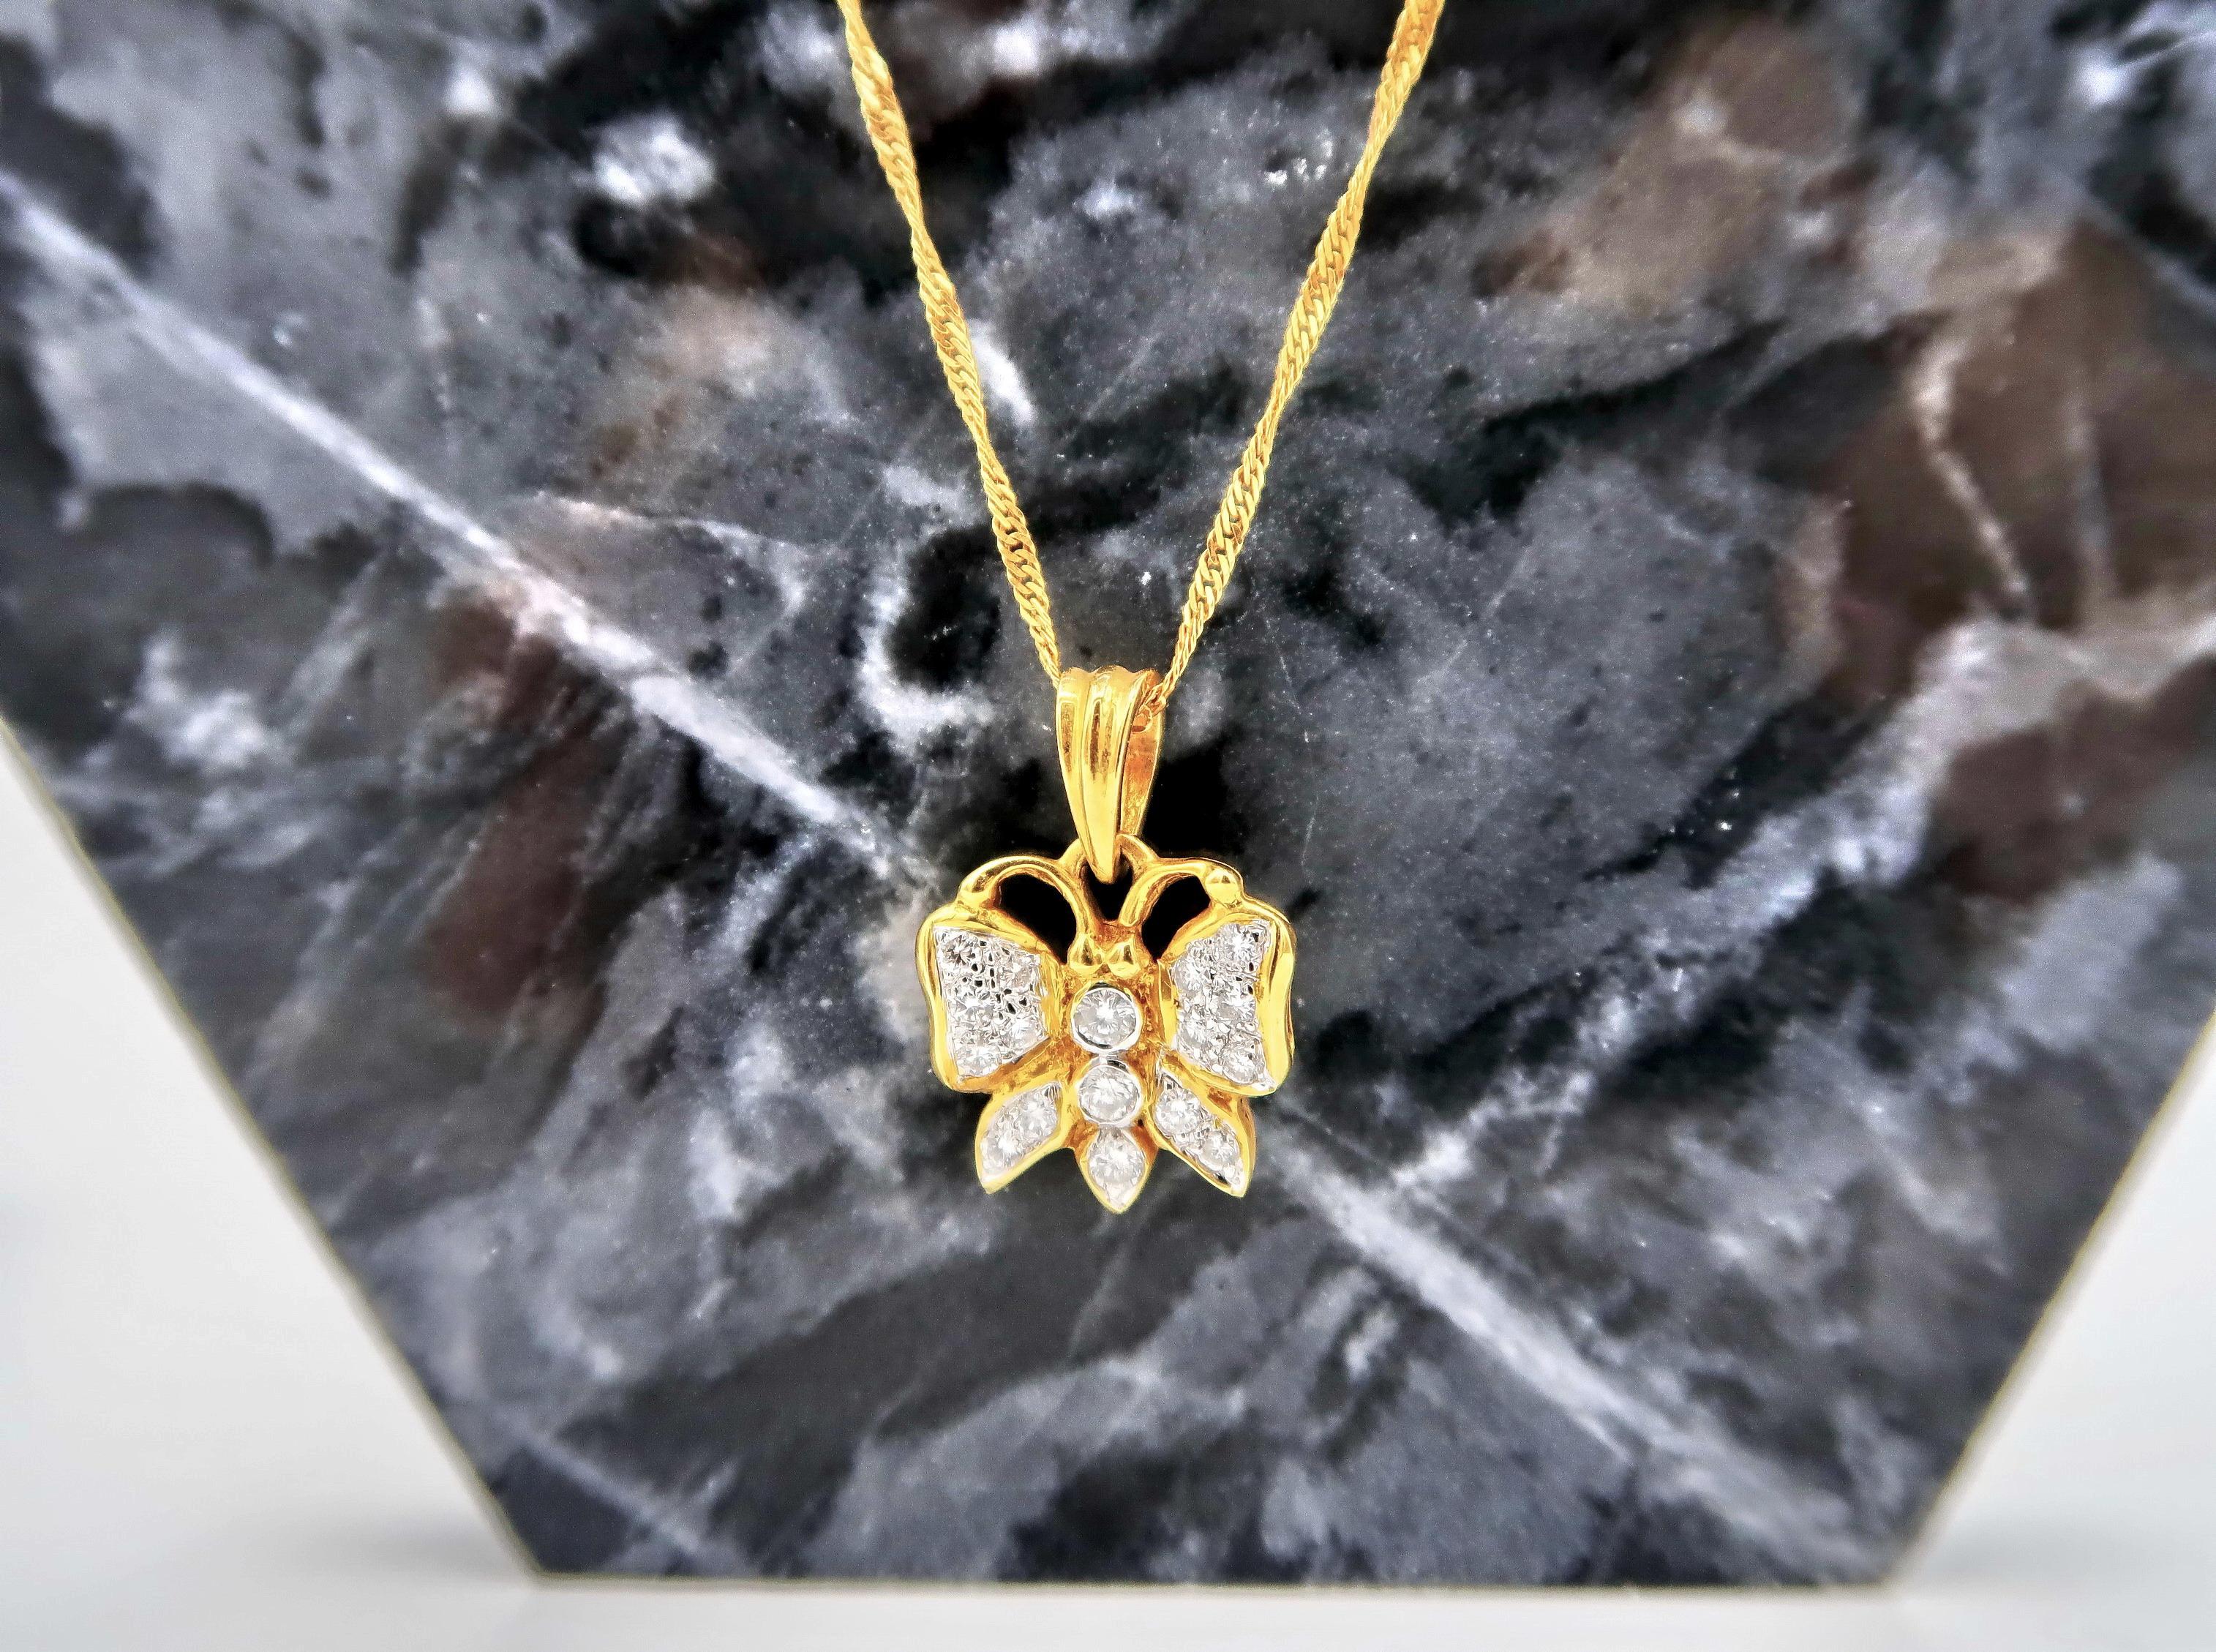 Butterfly Diamond Pendant Gold Twisted Curb Chain Necklace

Pendant
Gold: 22K Yellow Gold, 3.25 g
Diamond: 0.32 ct

Necklace
Gold: 18K Yellow Gold, 1.6 g
Length: 16 inches